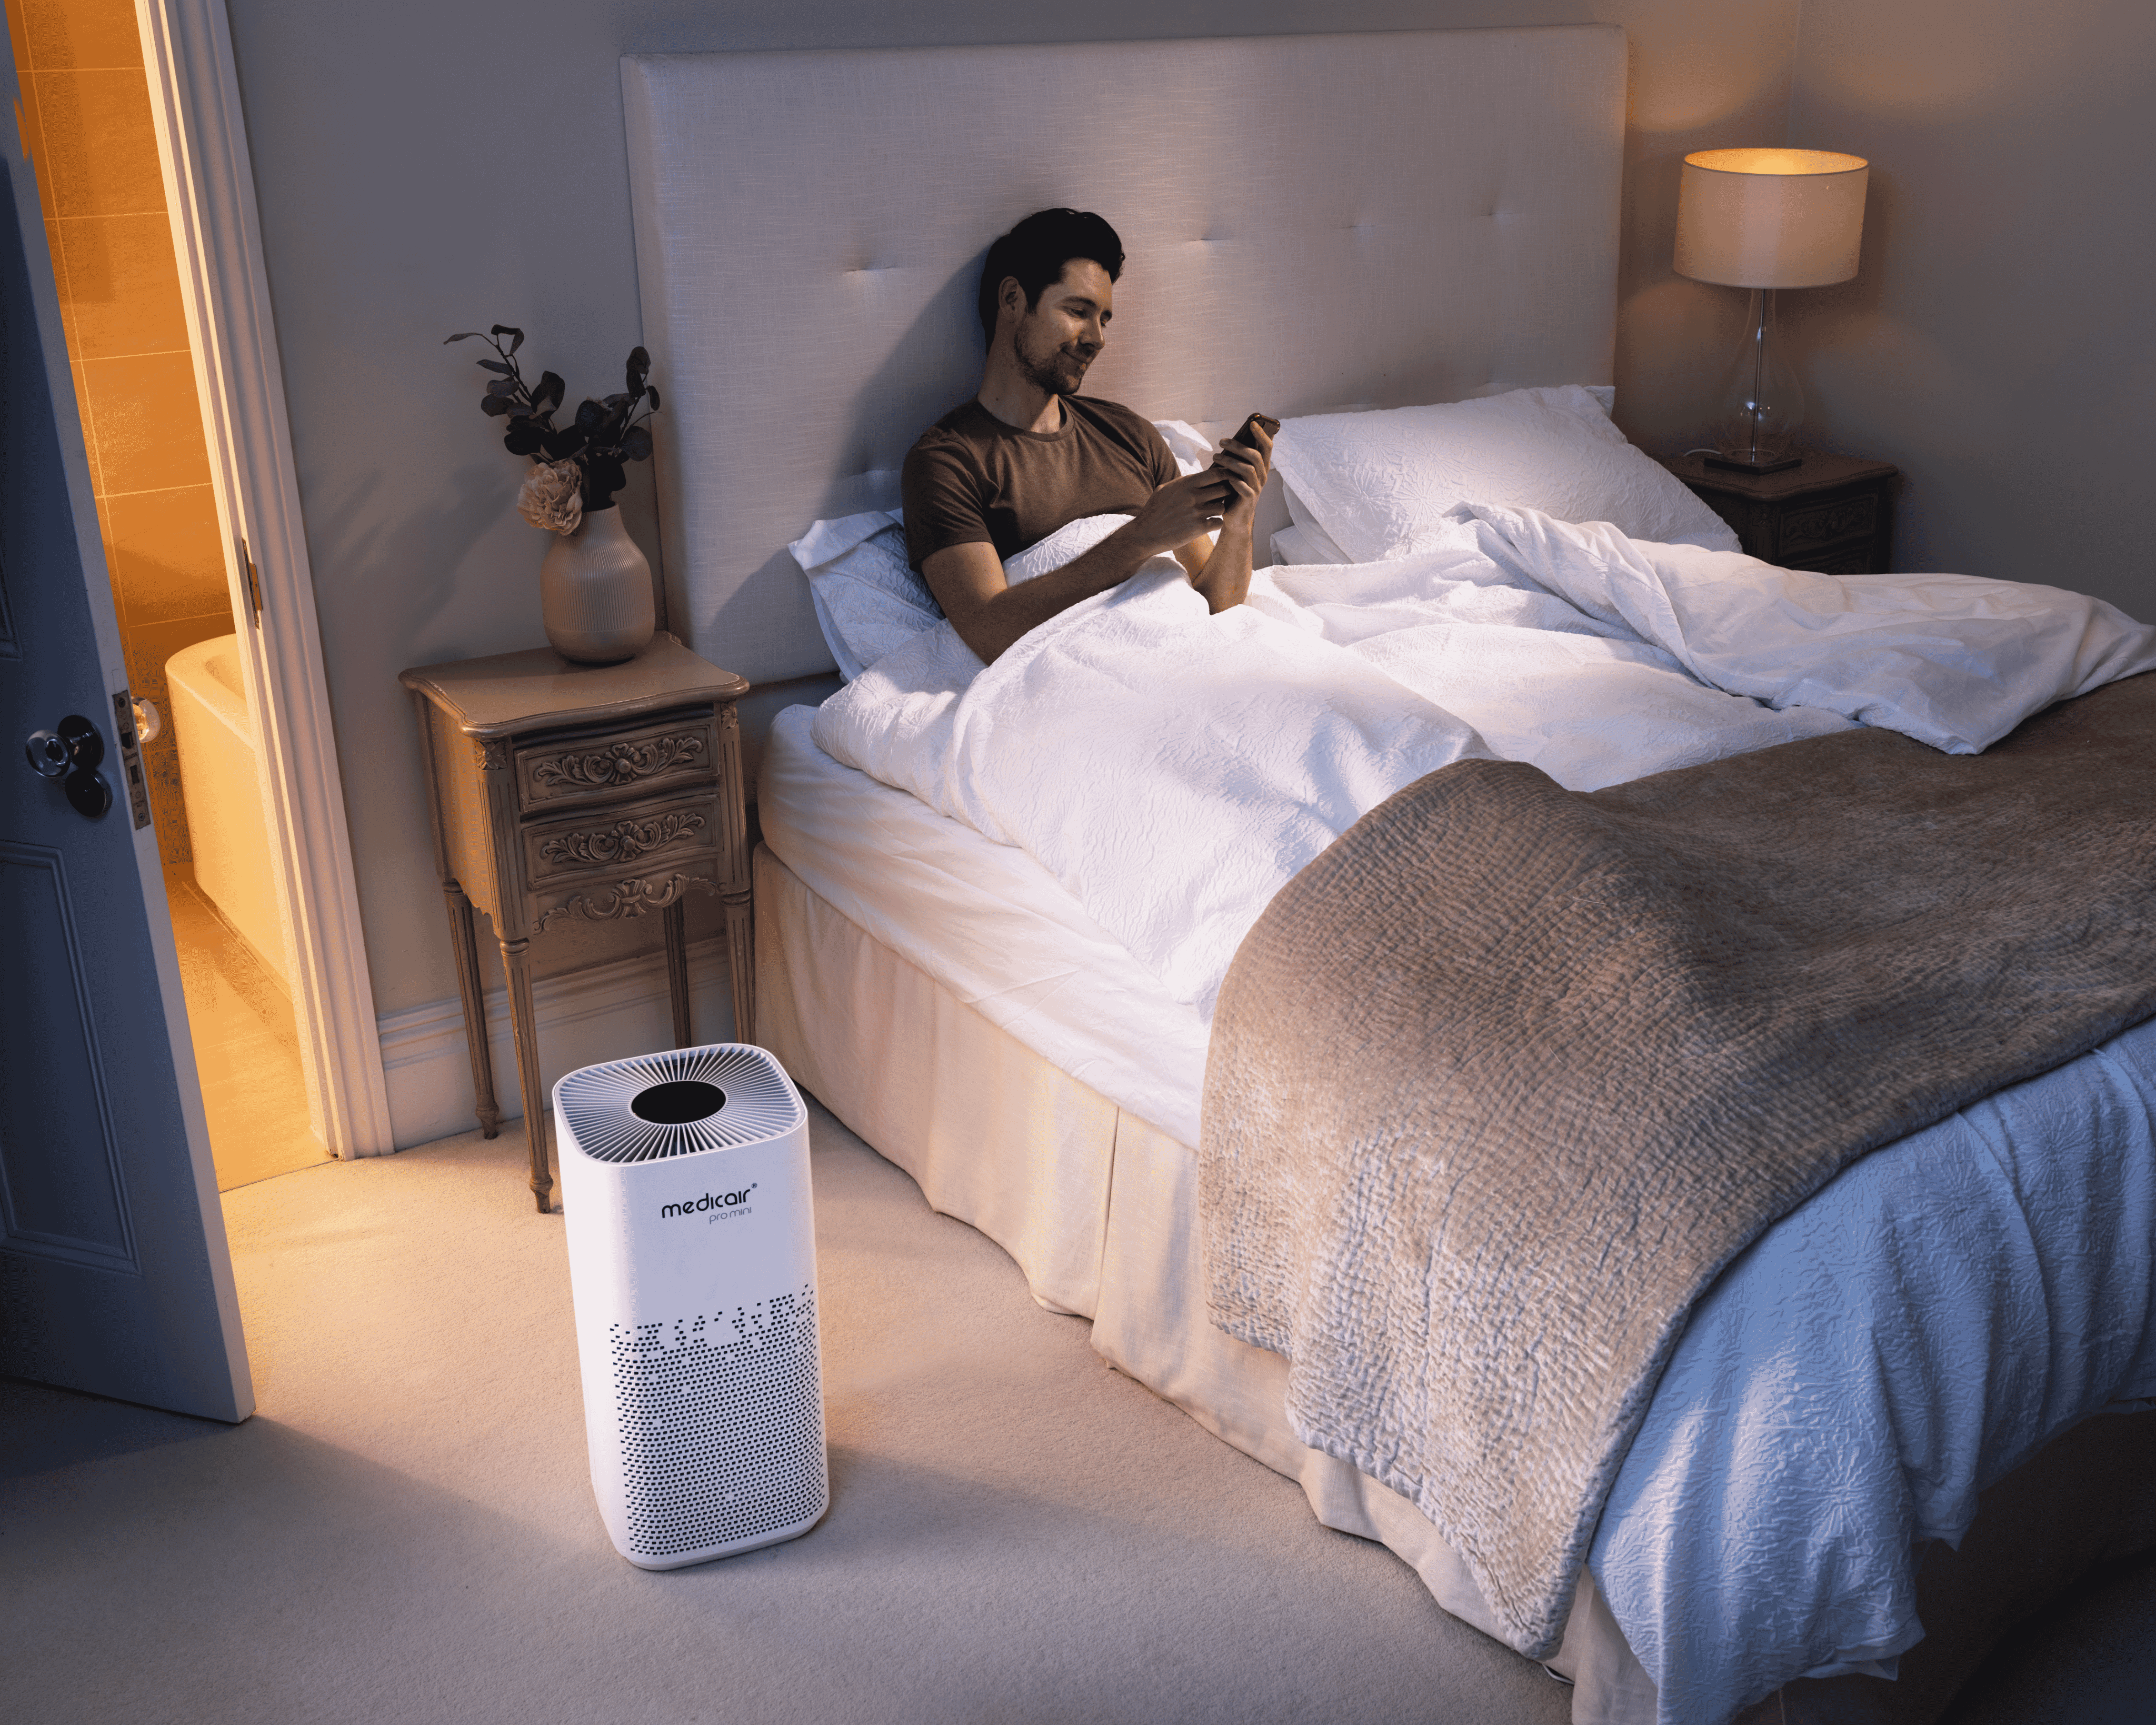 MedicAir air purifiers providing nighttime relief in the bedroom.